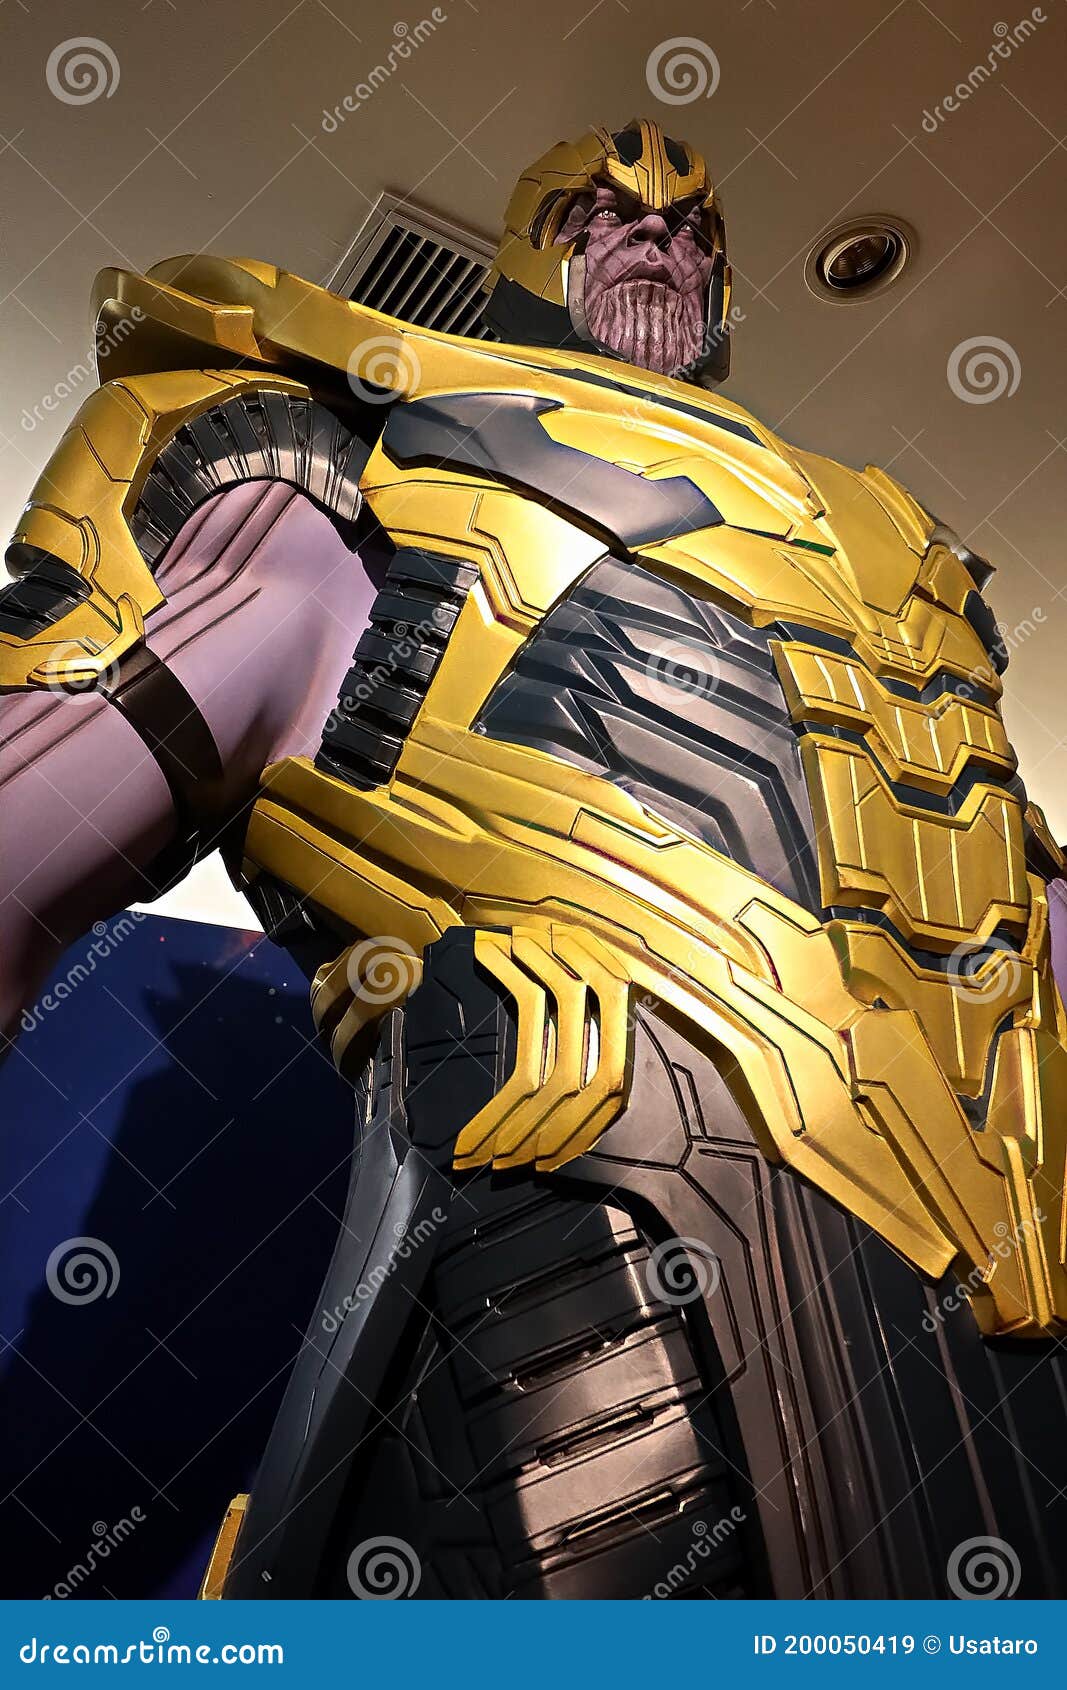 Thanos Full Armor Suit Action Figure Show for Promote Avengers Endgame  Editorial Stock Image - Image of comics, black: 200050419